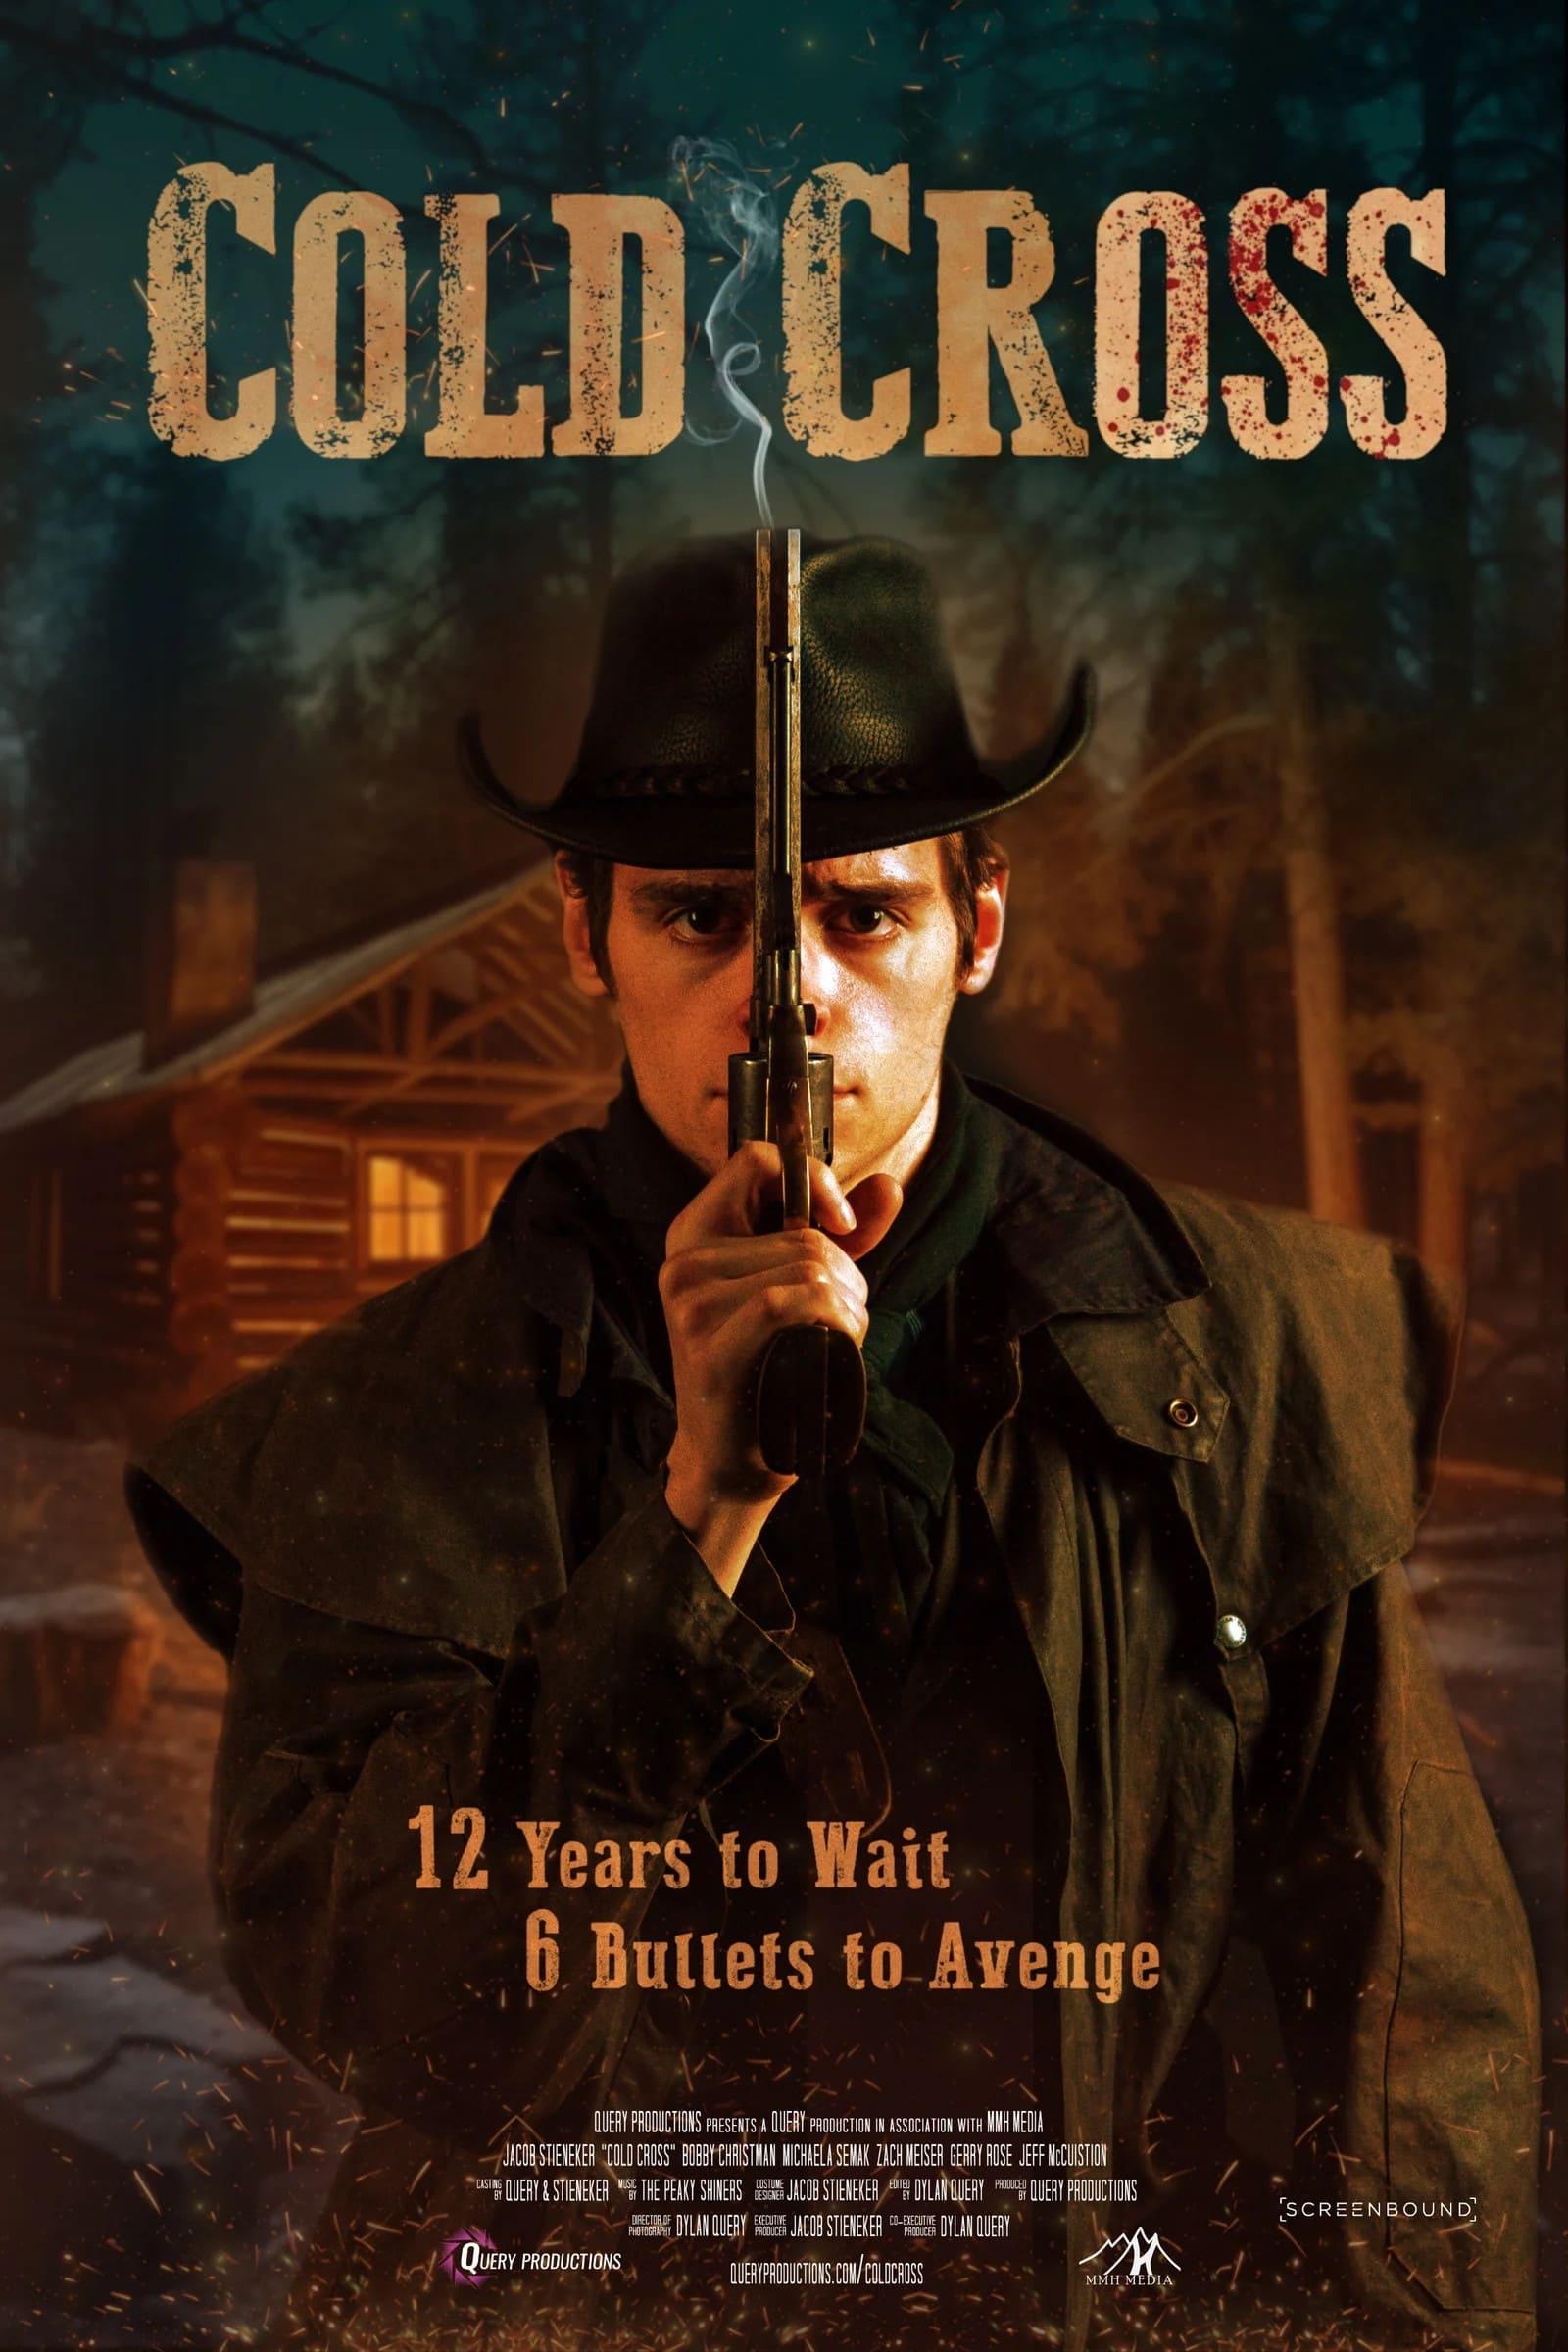 Gunfight at Cold Cross poster